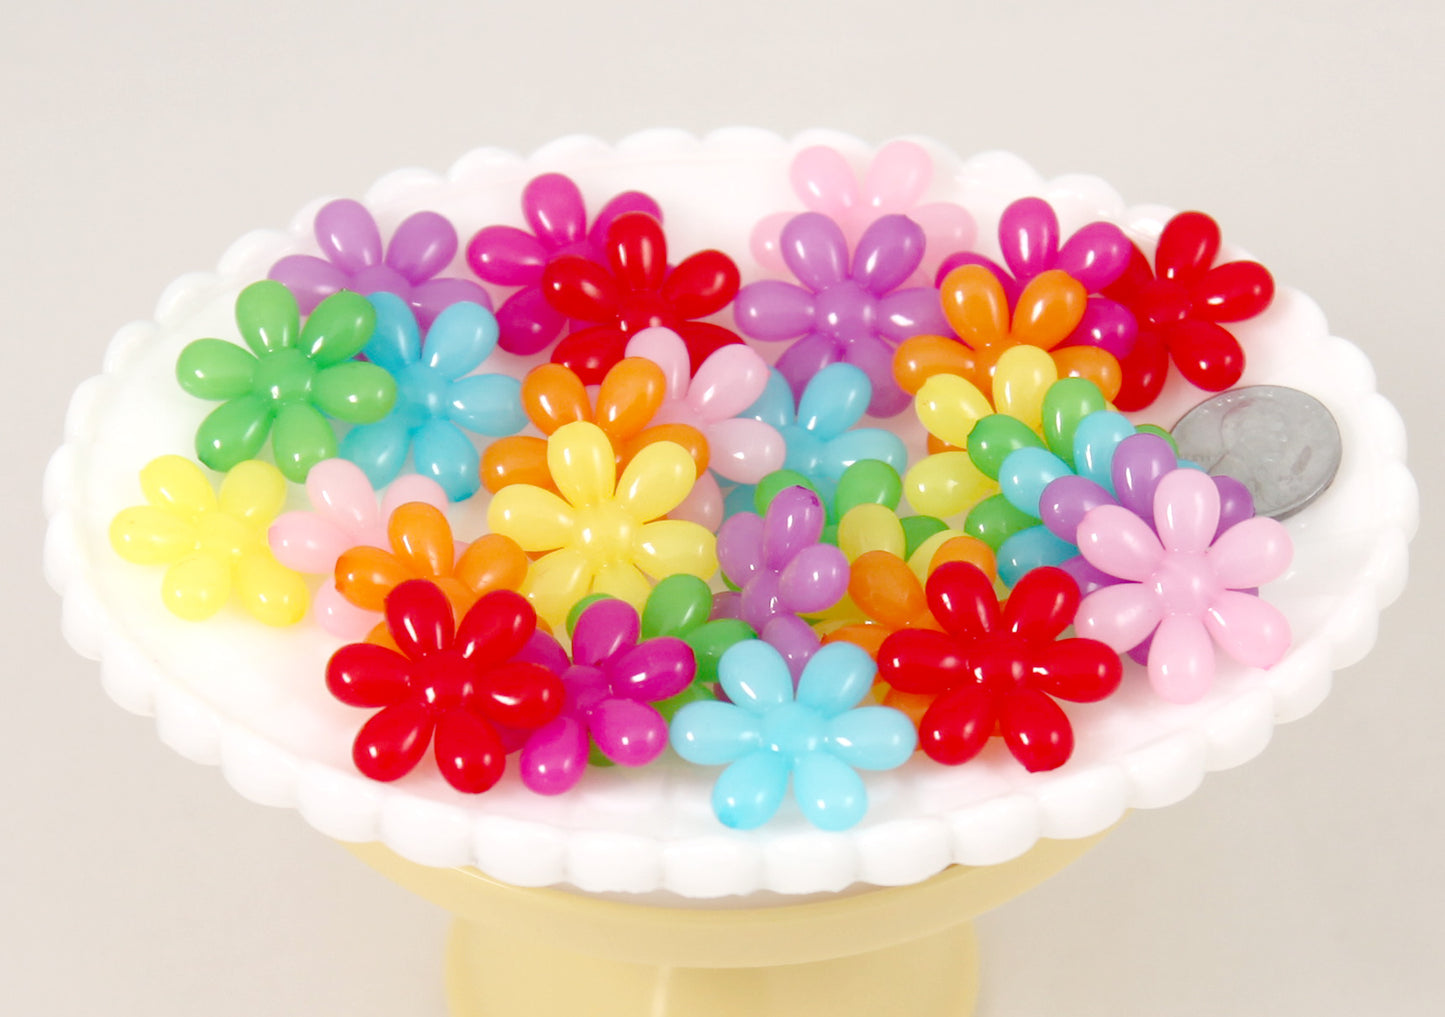 Flower Beads - 22mm Jelly Color Flower Beads Plastic Acrylic or Resin Beads – 40 pc set